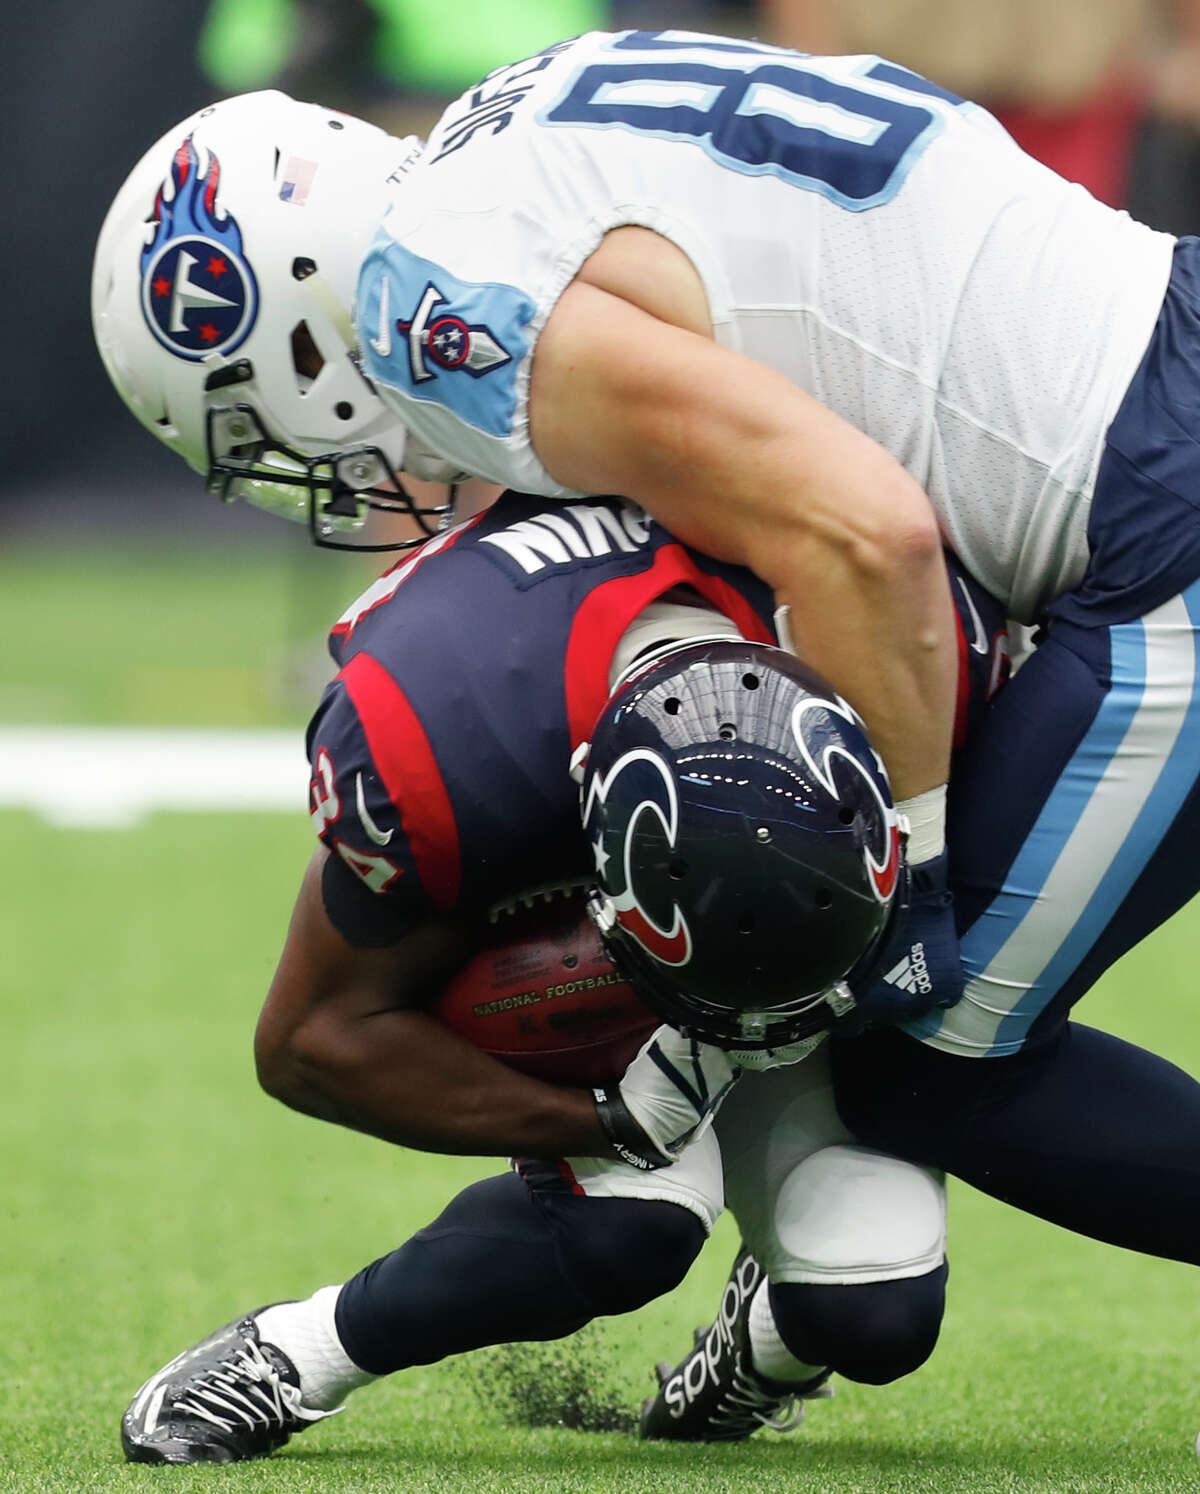 Houston Texans running back Tyler Ervin (34) is tackled by Tennessee Titans tight end Phillip Supernaw (89) on a punt return during the first quarter of an NFL football game at NRG Stadium on Sunday, Oct. 1, 2017, in Houston. Ervin left the game with a knee injury.